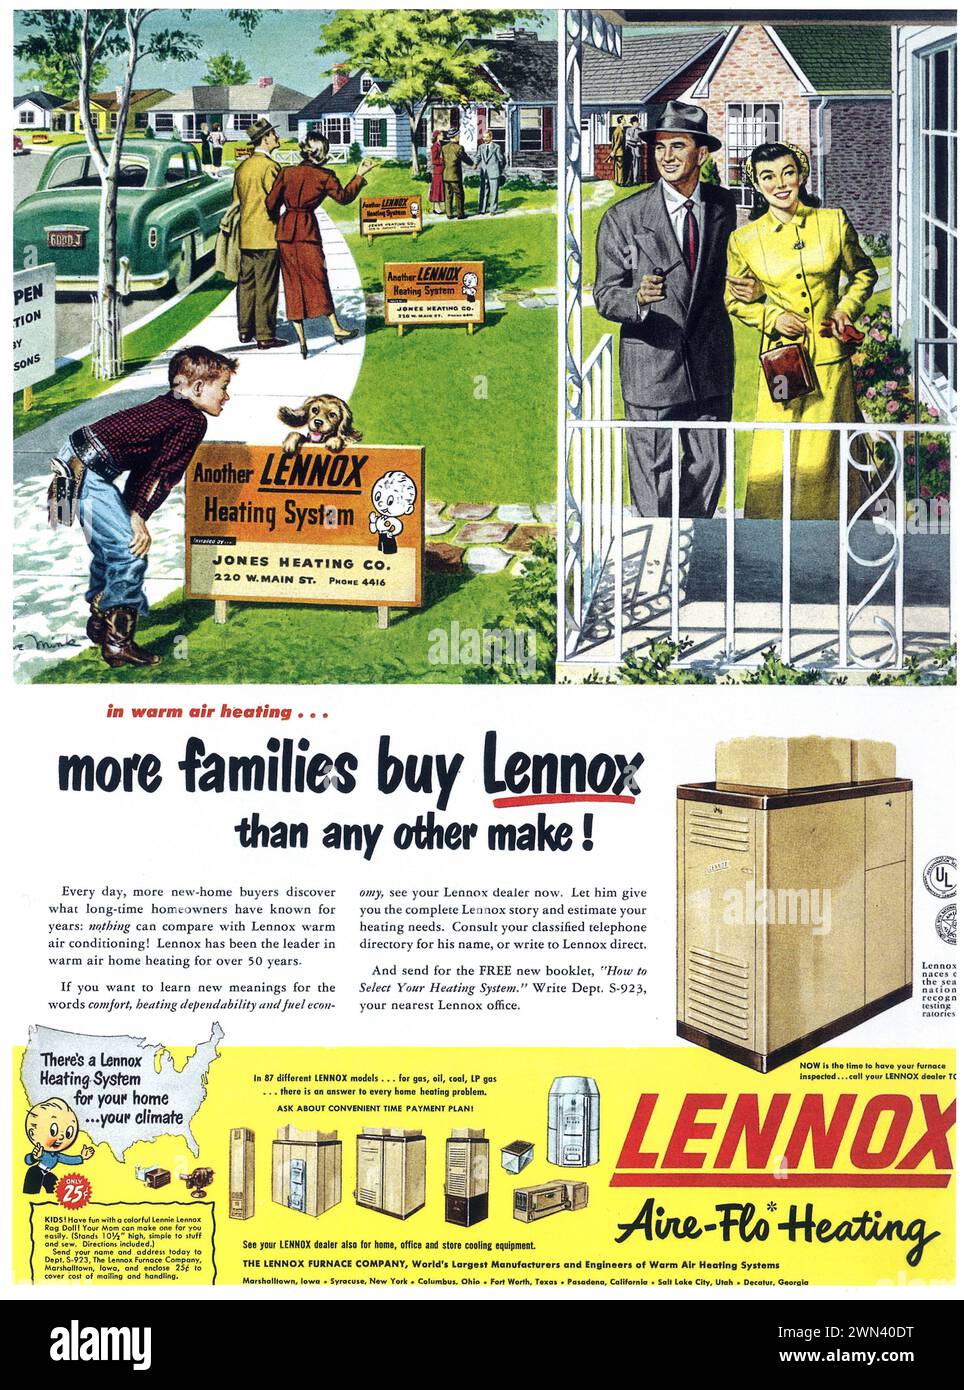 1950 annuncio a stampa Lennox Aire-Flo Heating Foto Stock